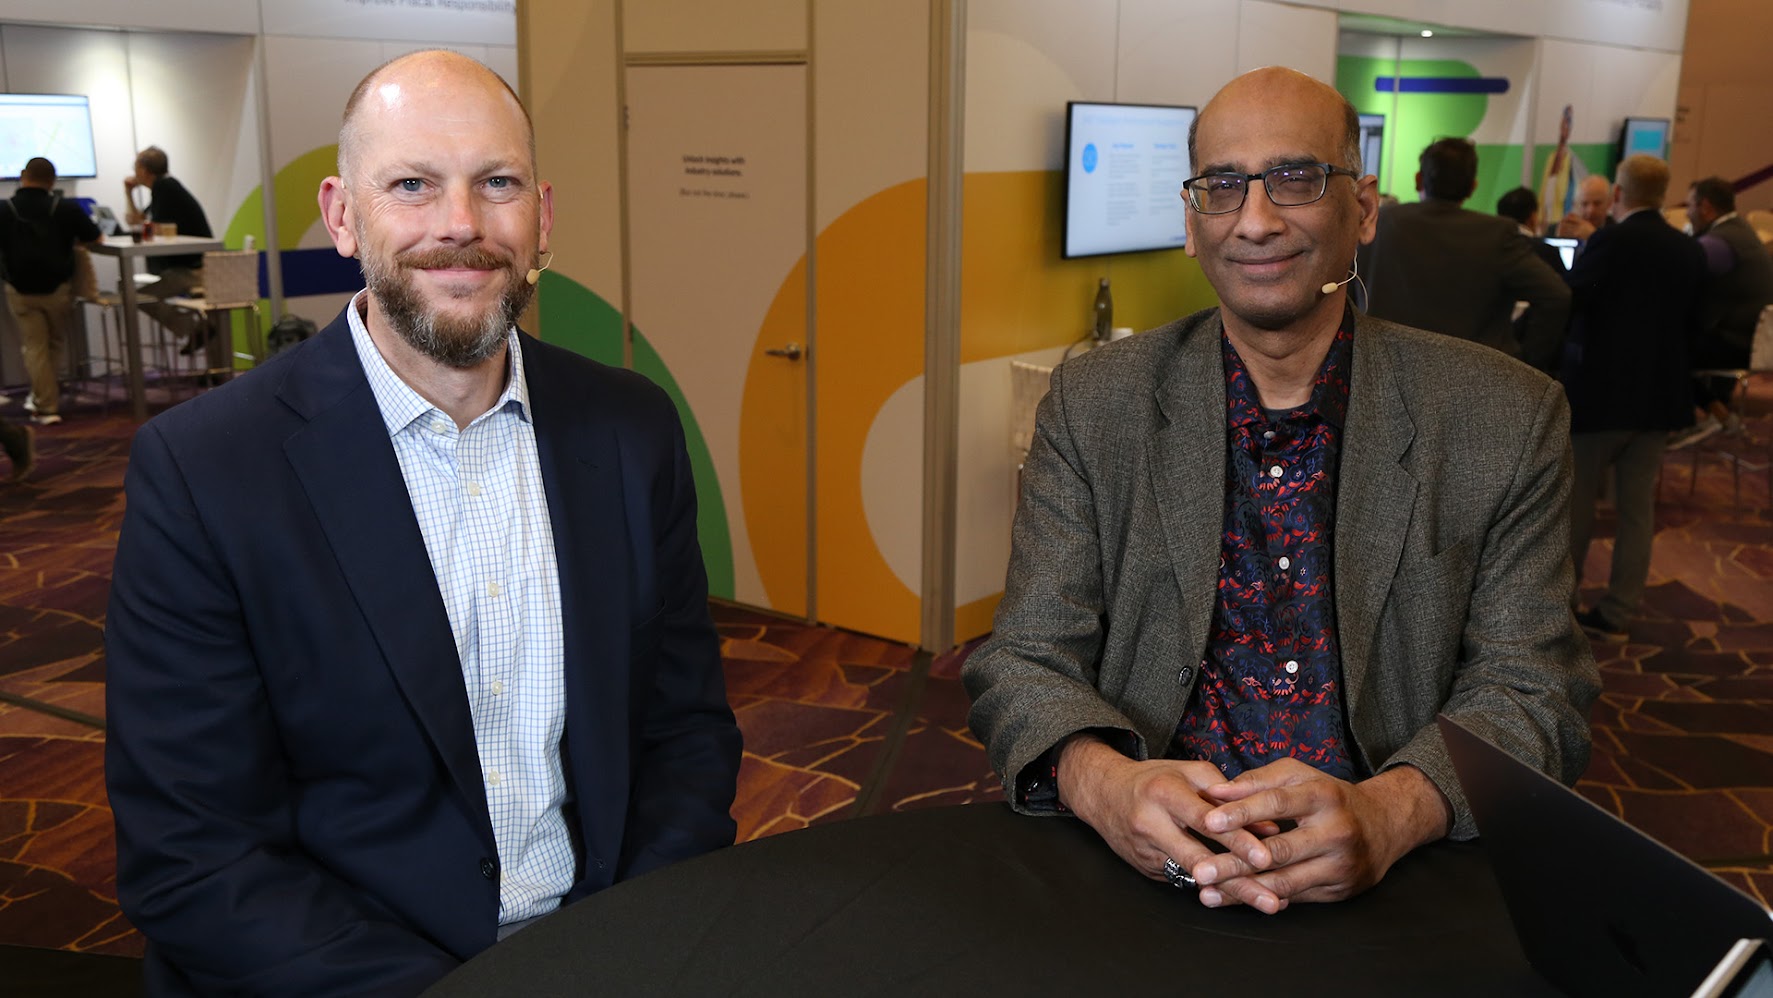 Jay Upchurch, CIO at SAS Institute, and Sri Raghavan, principal of data science and analytics at AWS, talk with theCUBE about the SAS Institute and AWS partnership.